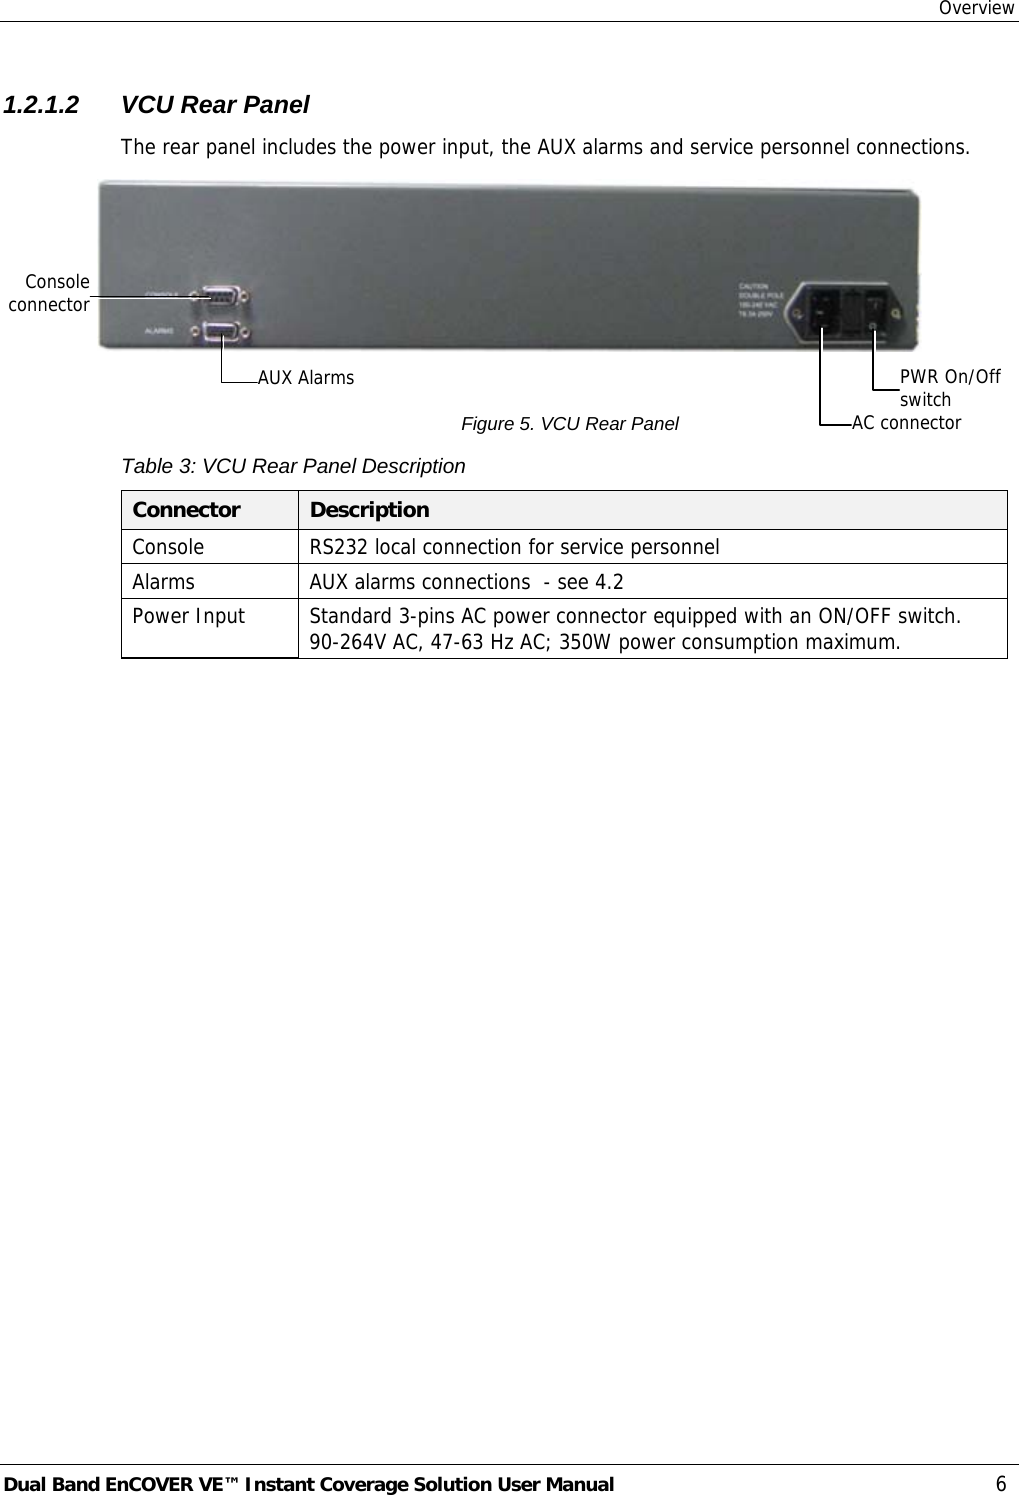 Overview Dual Band EnCOVER VE™ Instant Coverage Solution User Manual  6 1.2.1.2  VCU Rear Panel The rear panel includes the power input, the AUX alarms and service personnel connections.   Figure 5. VCU Rear Panel Table 3: VCU Rear Panel Description Connector  Description Console  RS232 local connection for service personnel Alarms  AUX alarms connections  - see  4.2 Power Input  Standard 3-pins AC power connector equipped with an ON/OFF switch. 90-264V AC, 47-63 Hz AC; 350W power consumption maximum.  PWR On/Off switch AC connectorAUX Alarms Consoleconnector